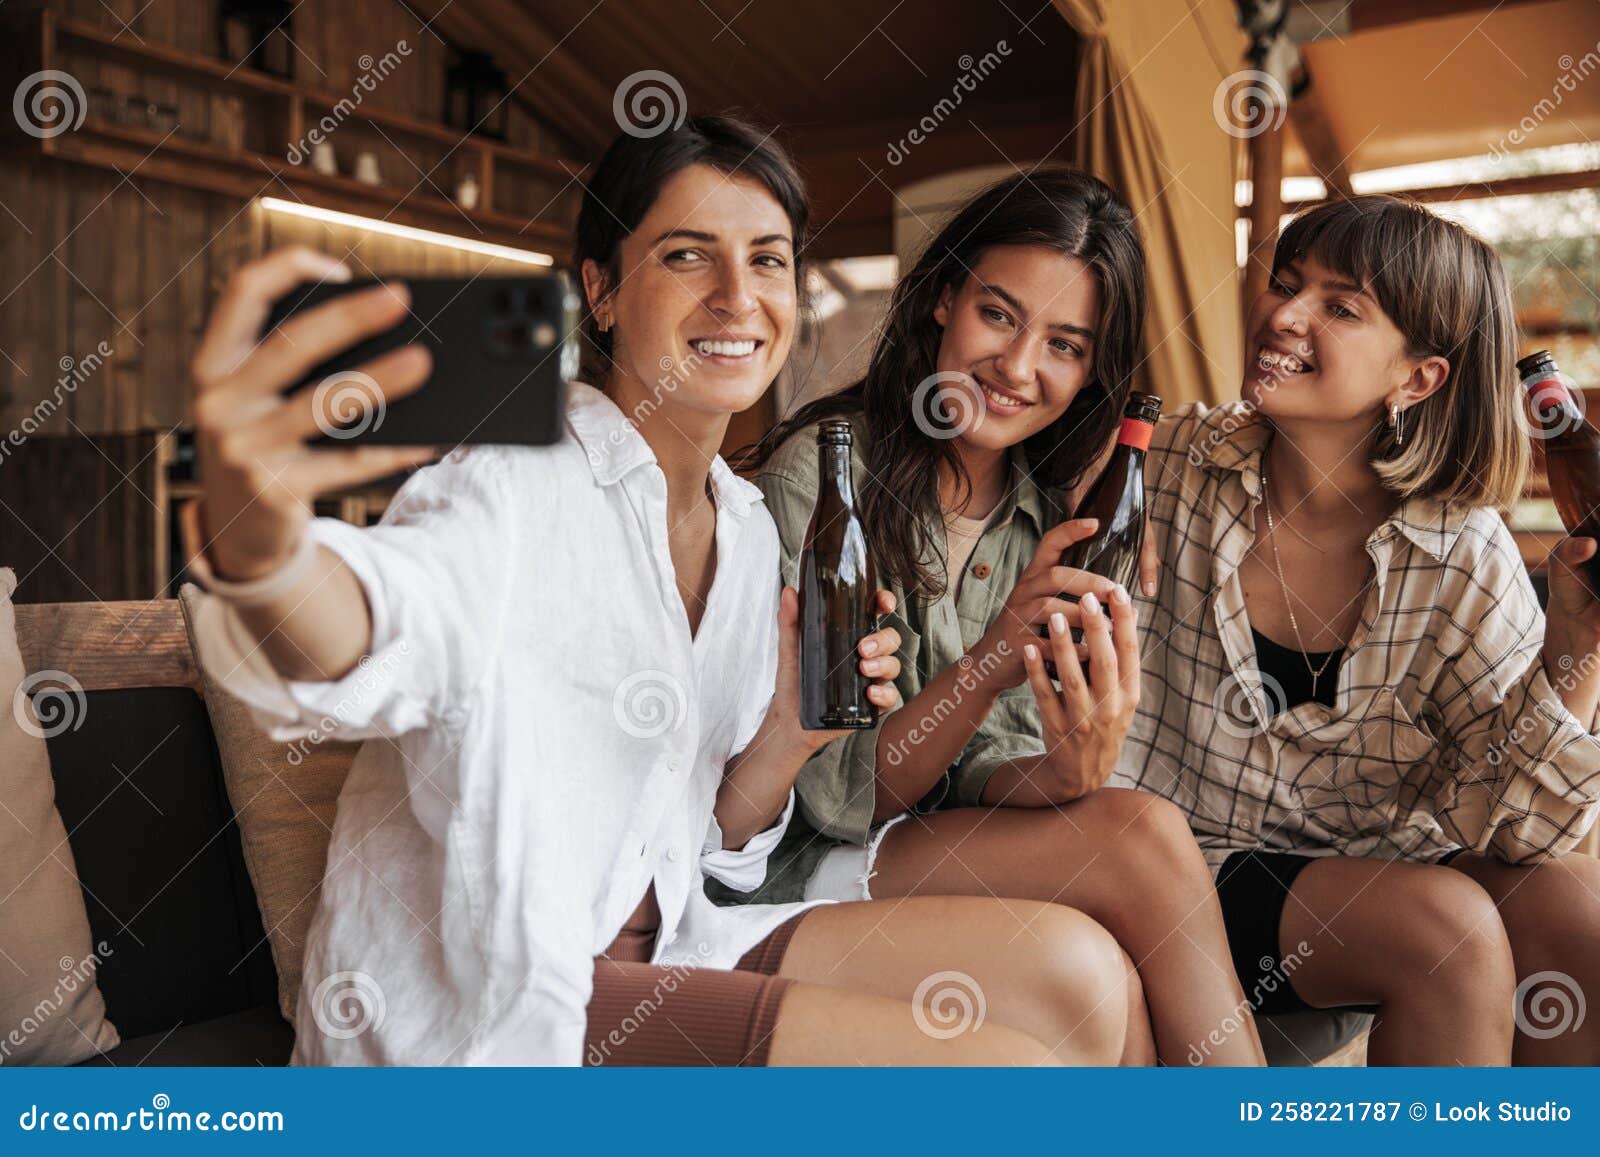 Funny Young Caucasian Girls Make Joint Selfie on Phone Relaxing Indoors ...